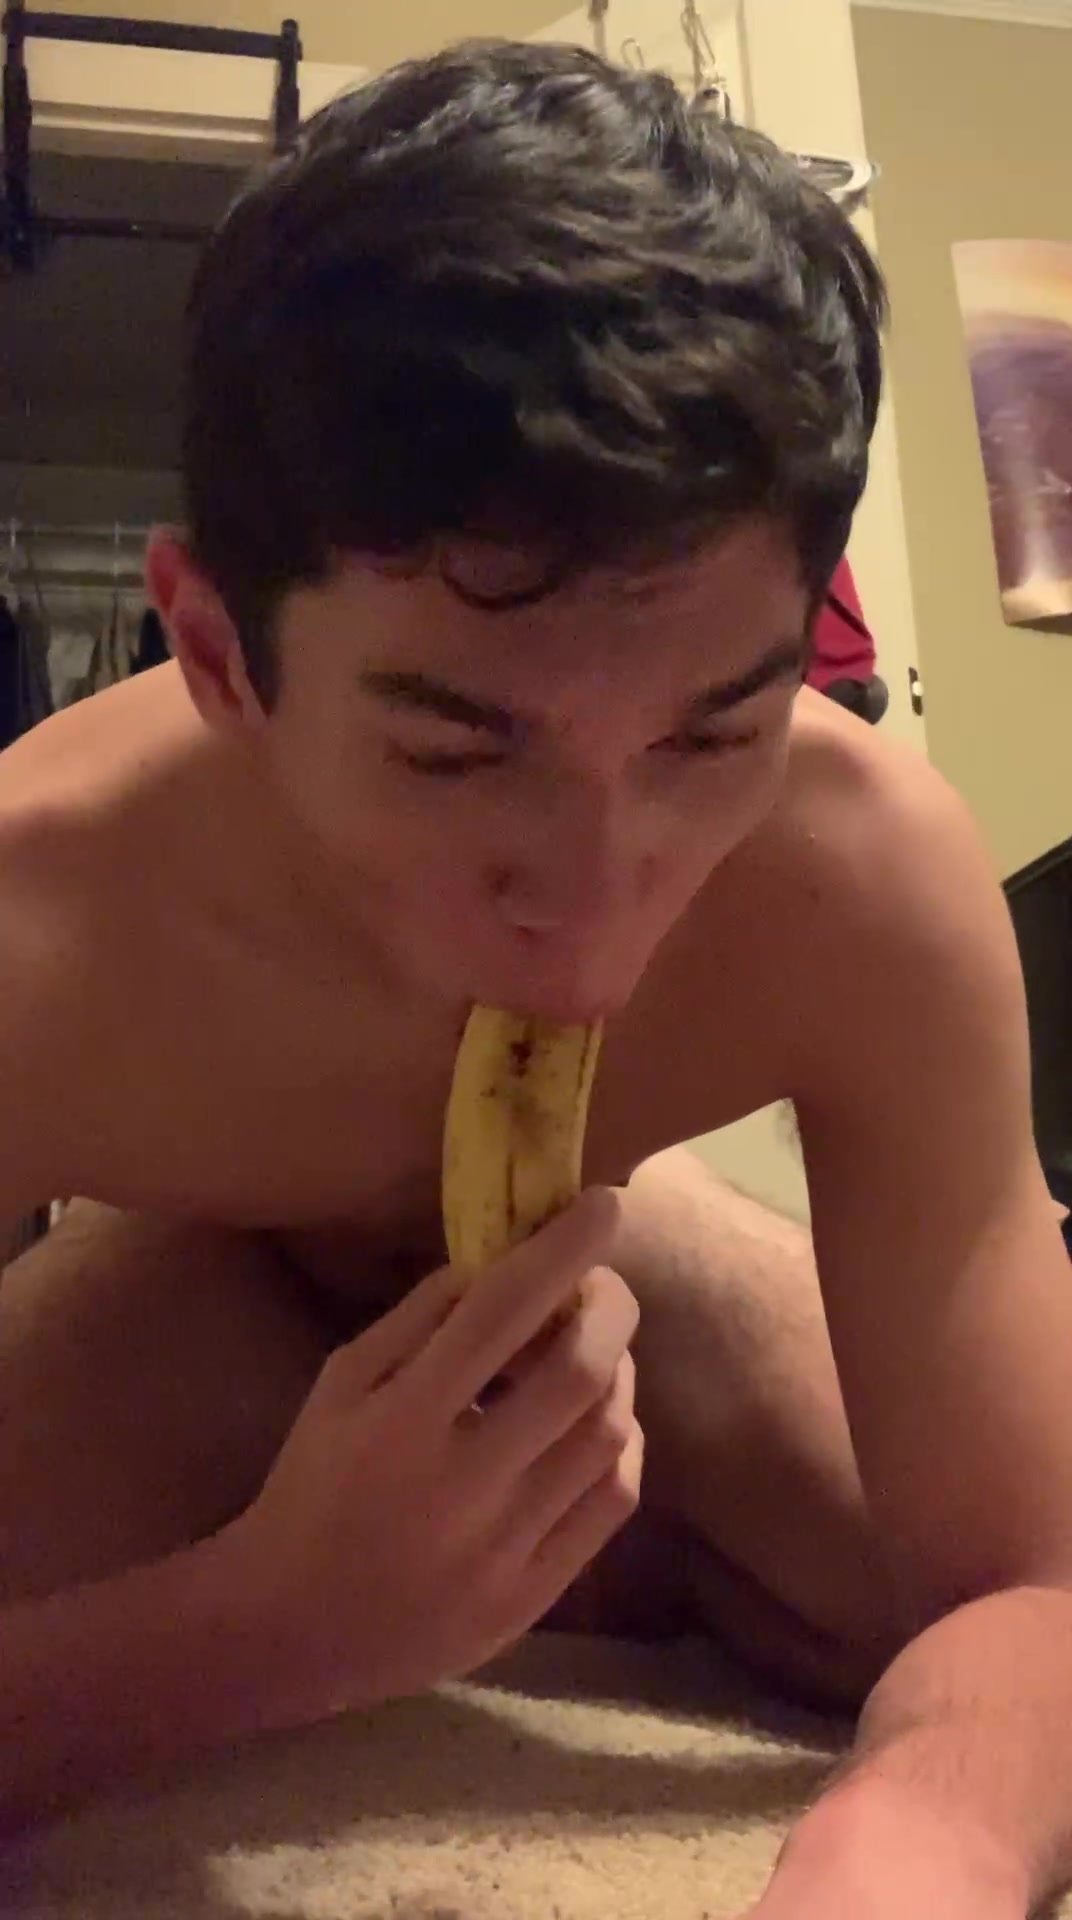 sucking on a banana and shoving it up his ass